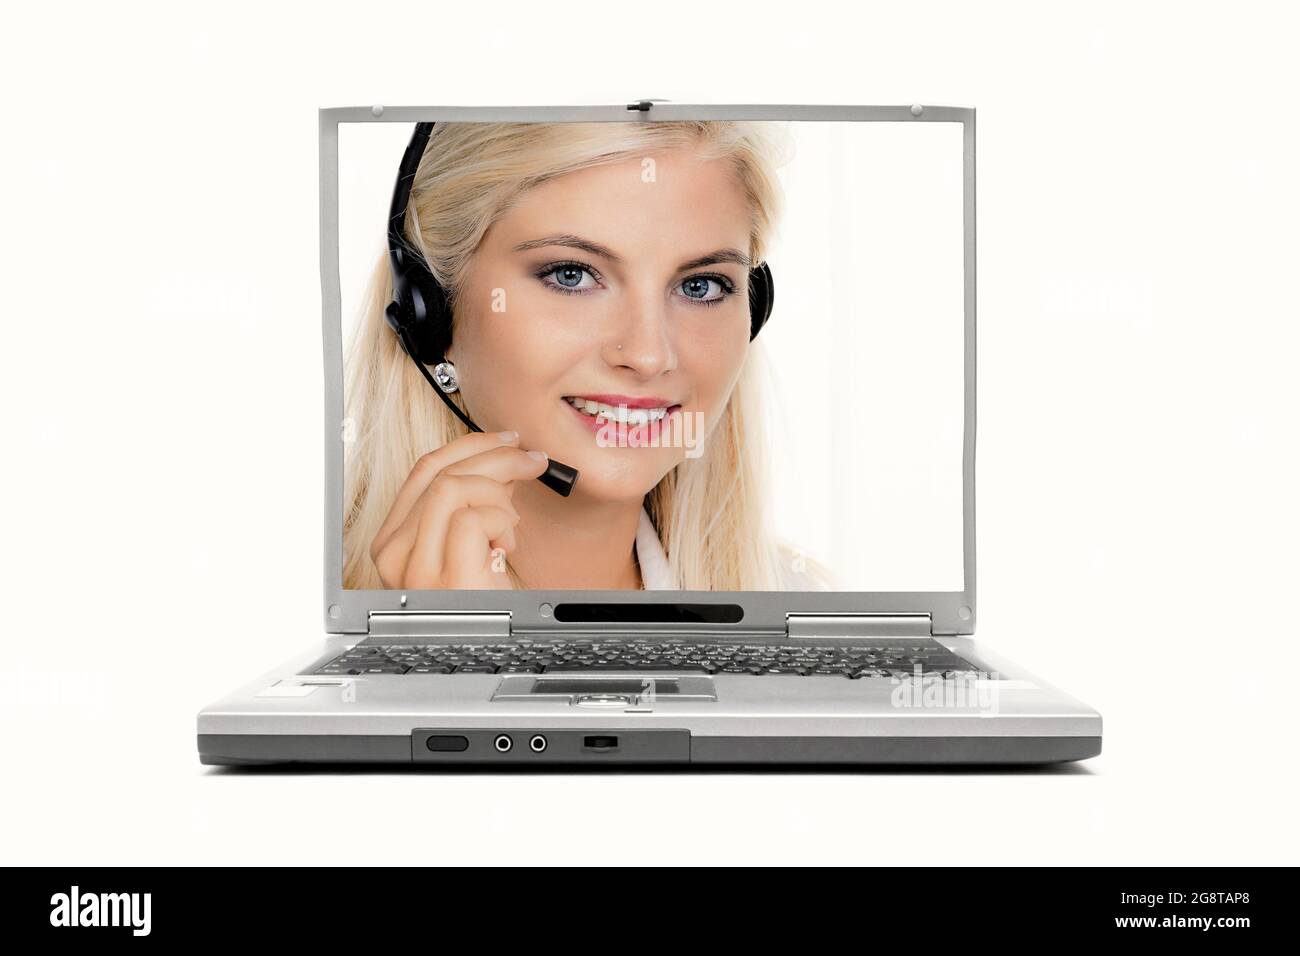 woman with headset on laptop display Stock Photo